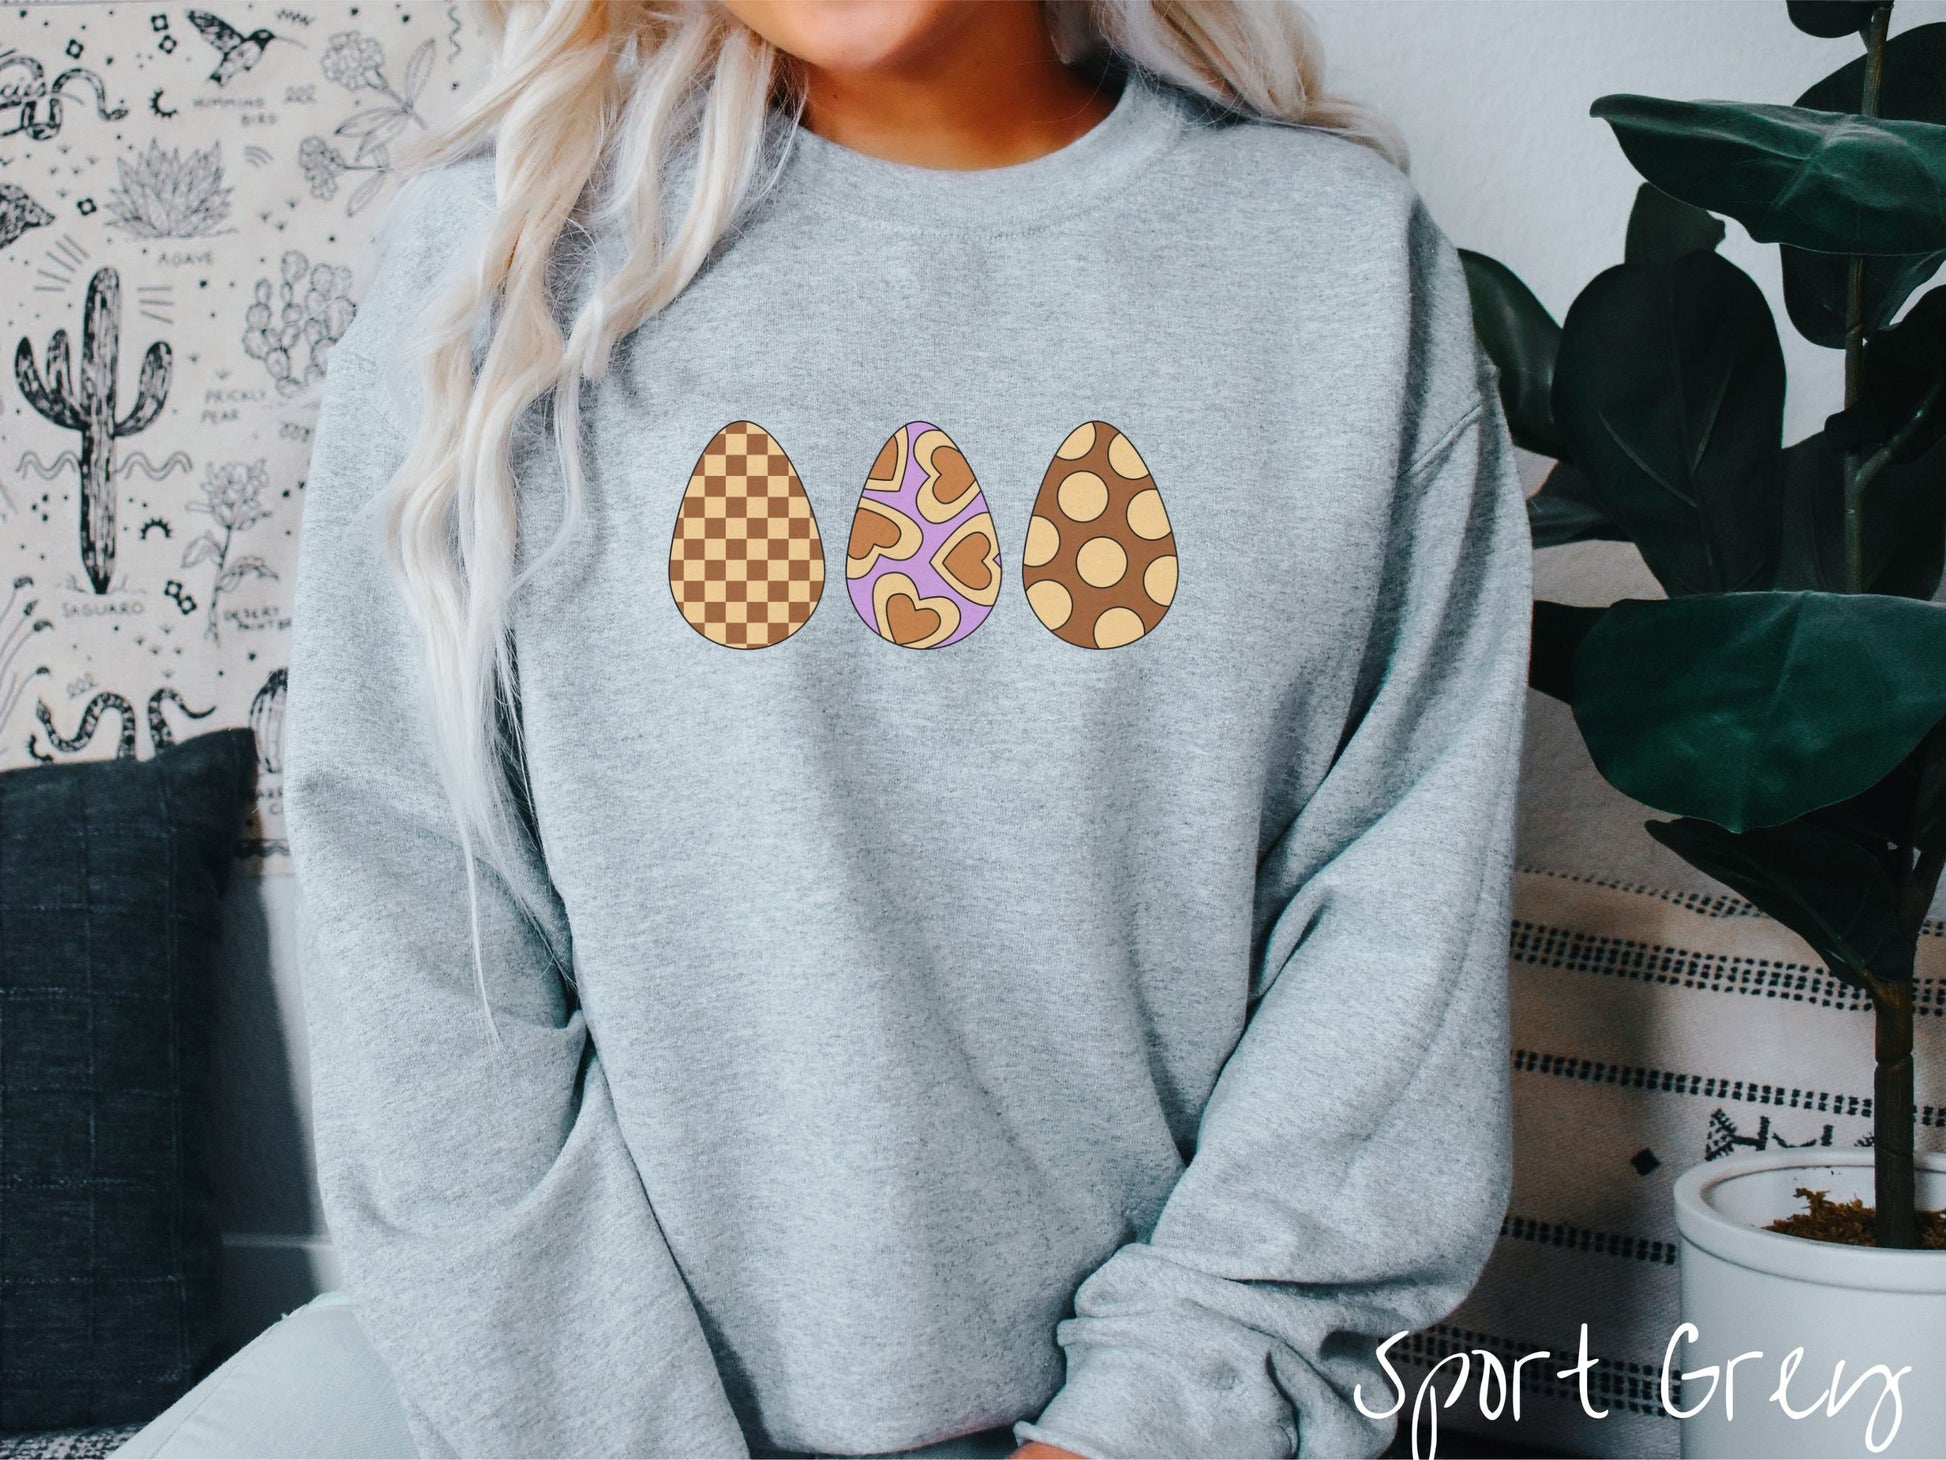 A woman wearing a cute, vintage sport grey colored sweatshirt with three Easter eggs. The left has a light yellow and brown checkerboard pattern, the middle is purple with light yellow brown hearts, and the right is brown with light yellow circles.